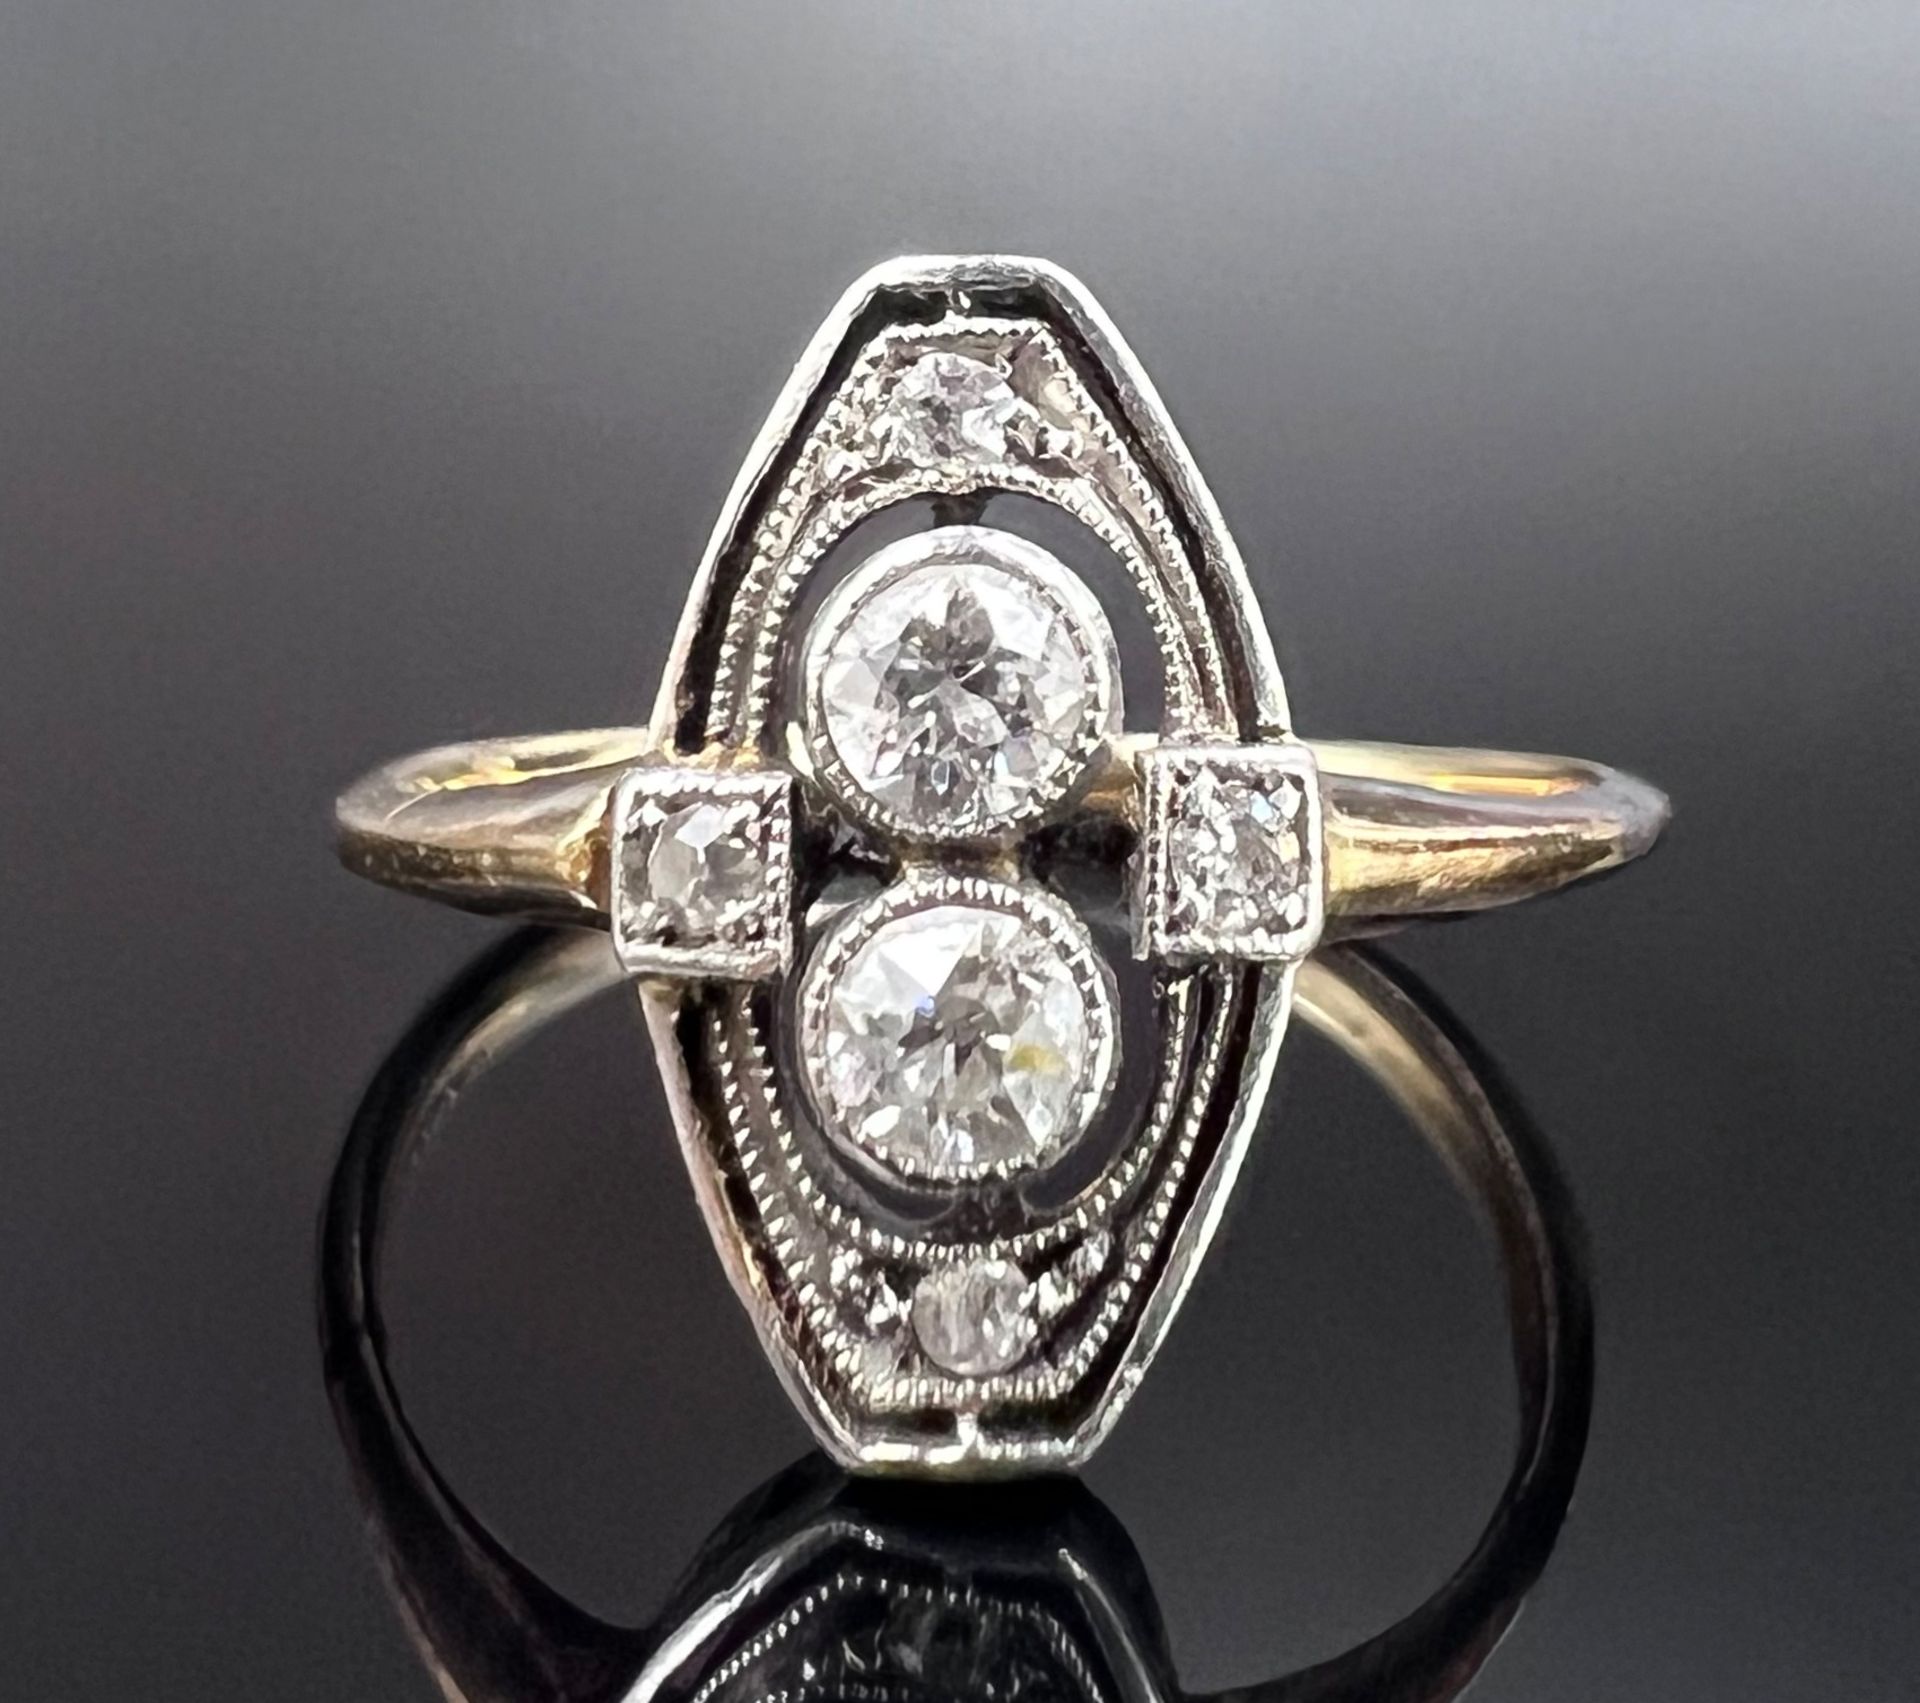 Ladies' ring. 585 yellow gold and white gold set with diamonds. Art déco. 1920/30s.